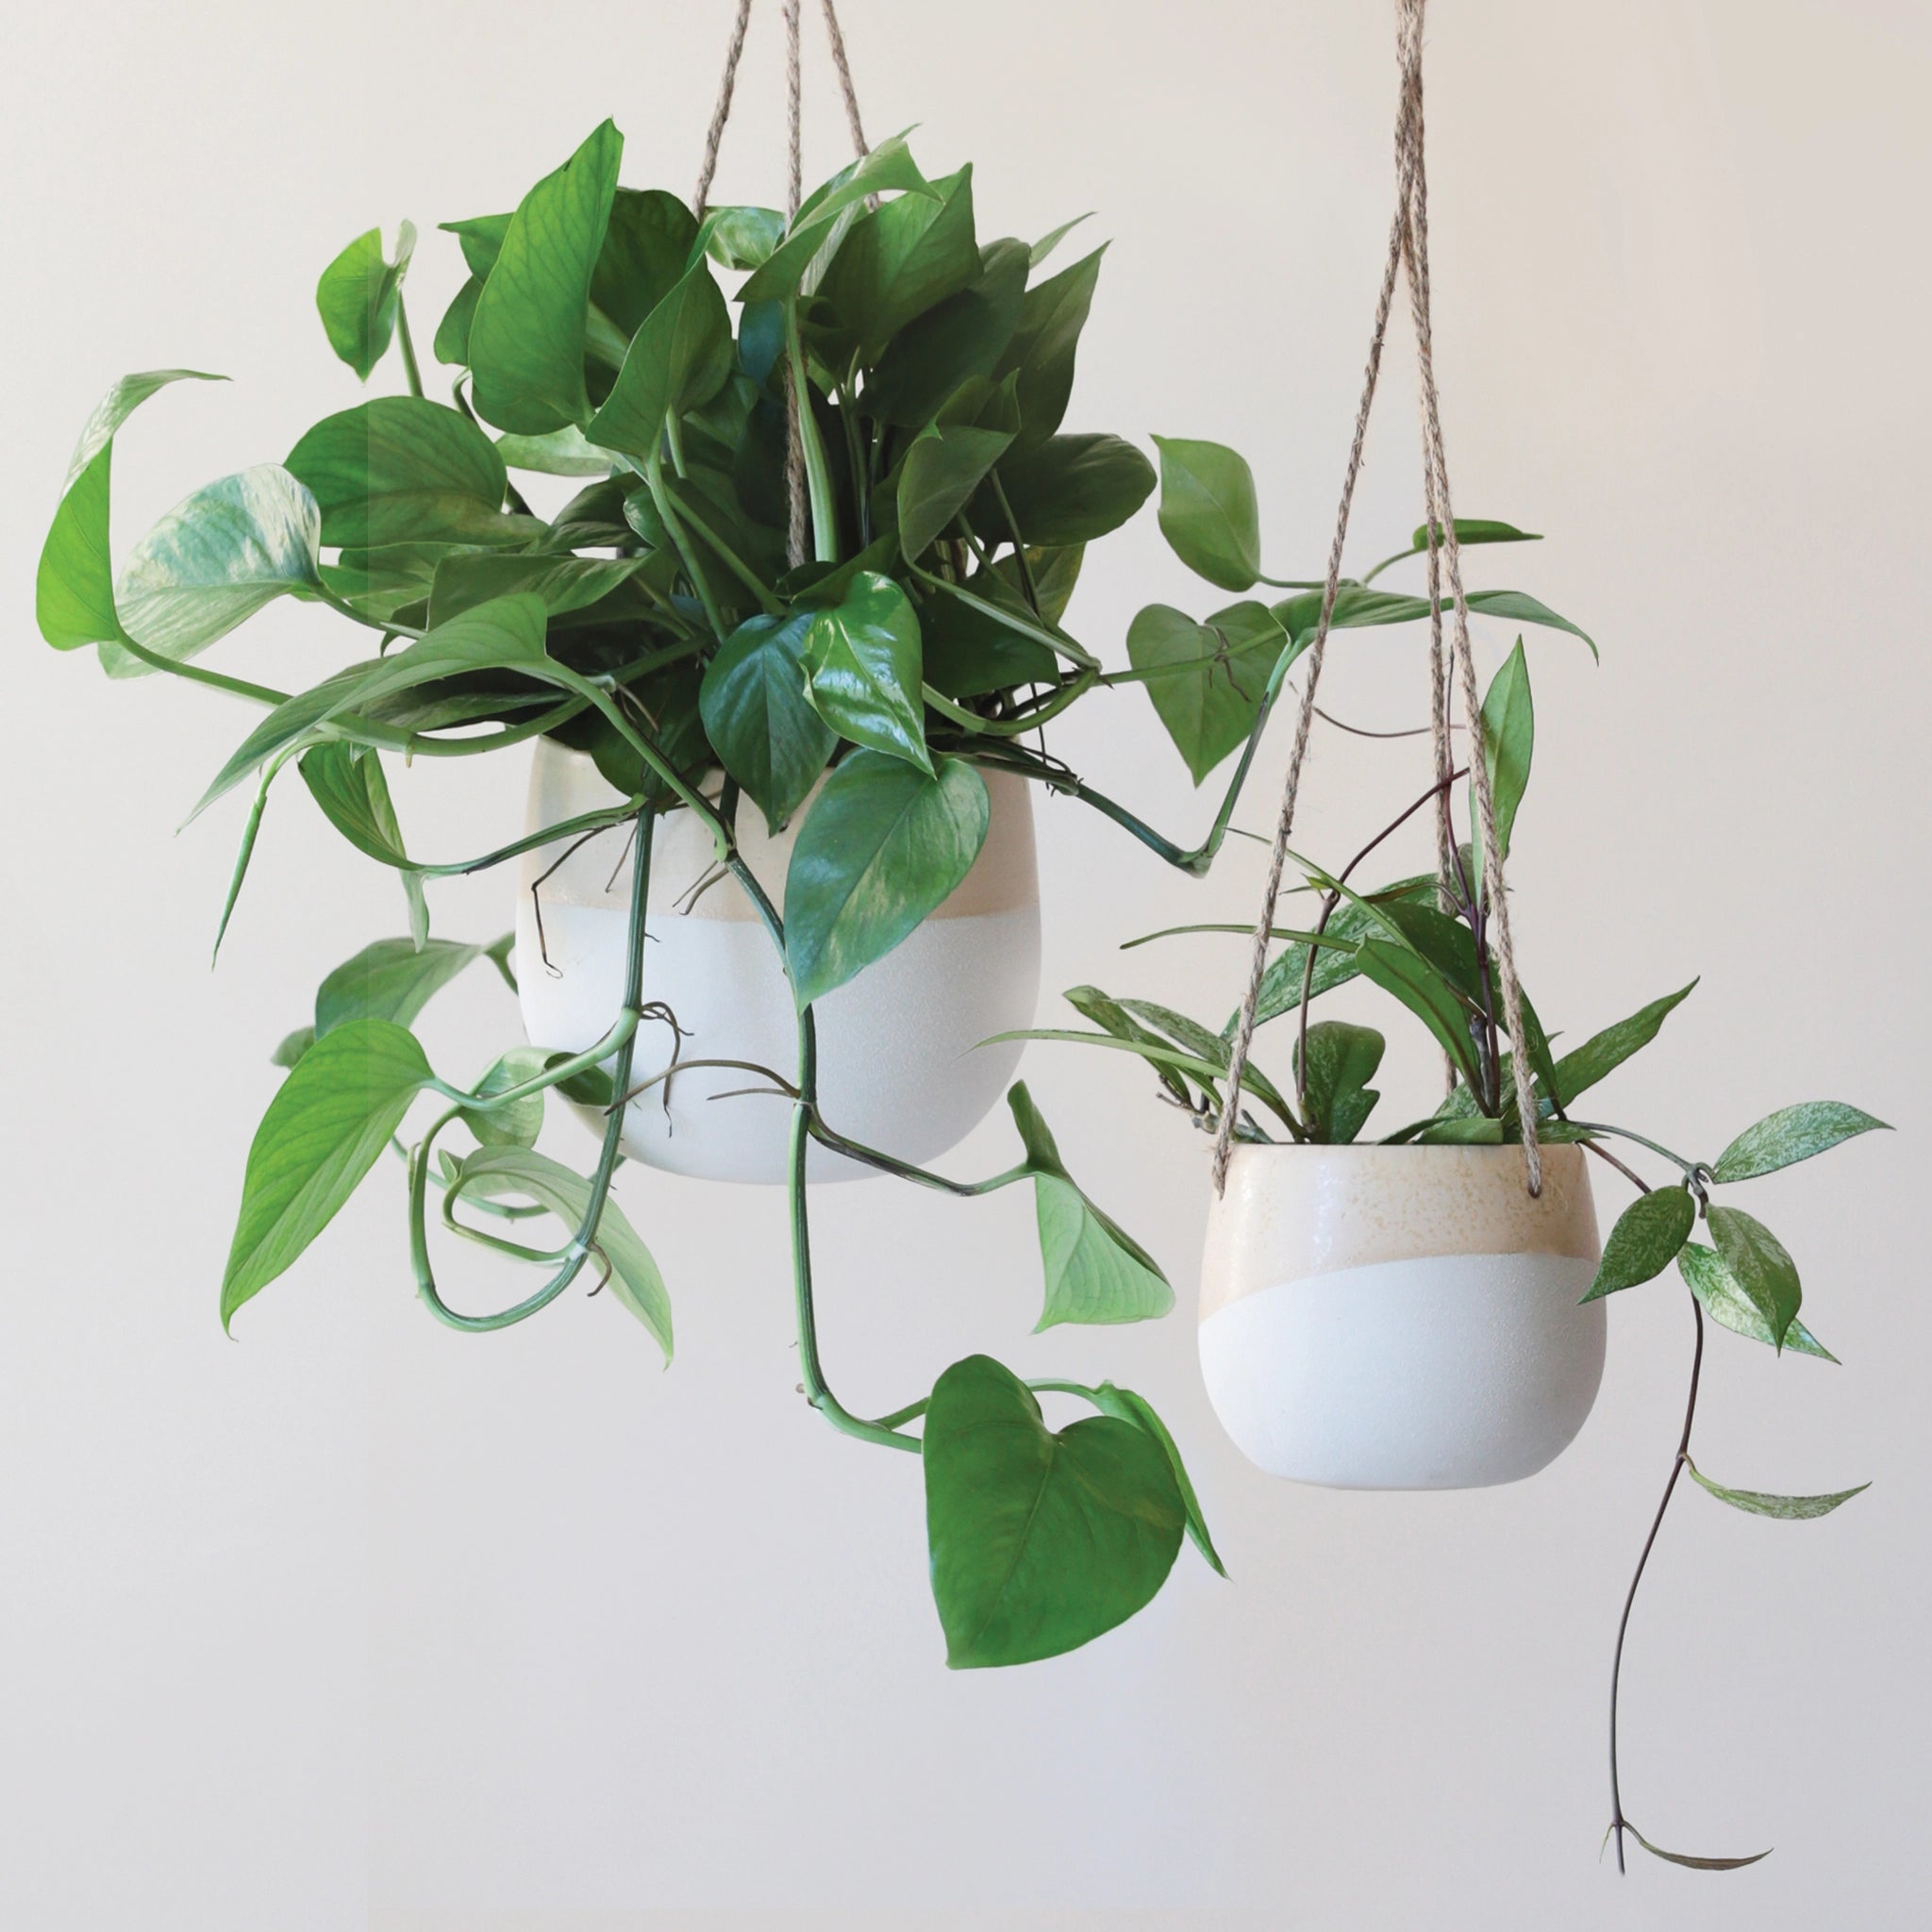 Two neutral ceramic hanging planters with rounded sides and a flat bottom along with a half cream half tan design on them and three jute strings as the hangers. These pots are photographed with green viney house plants.